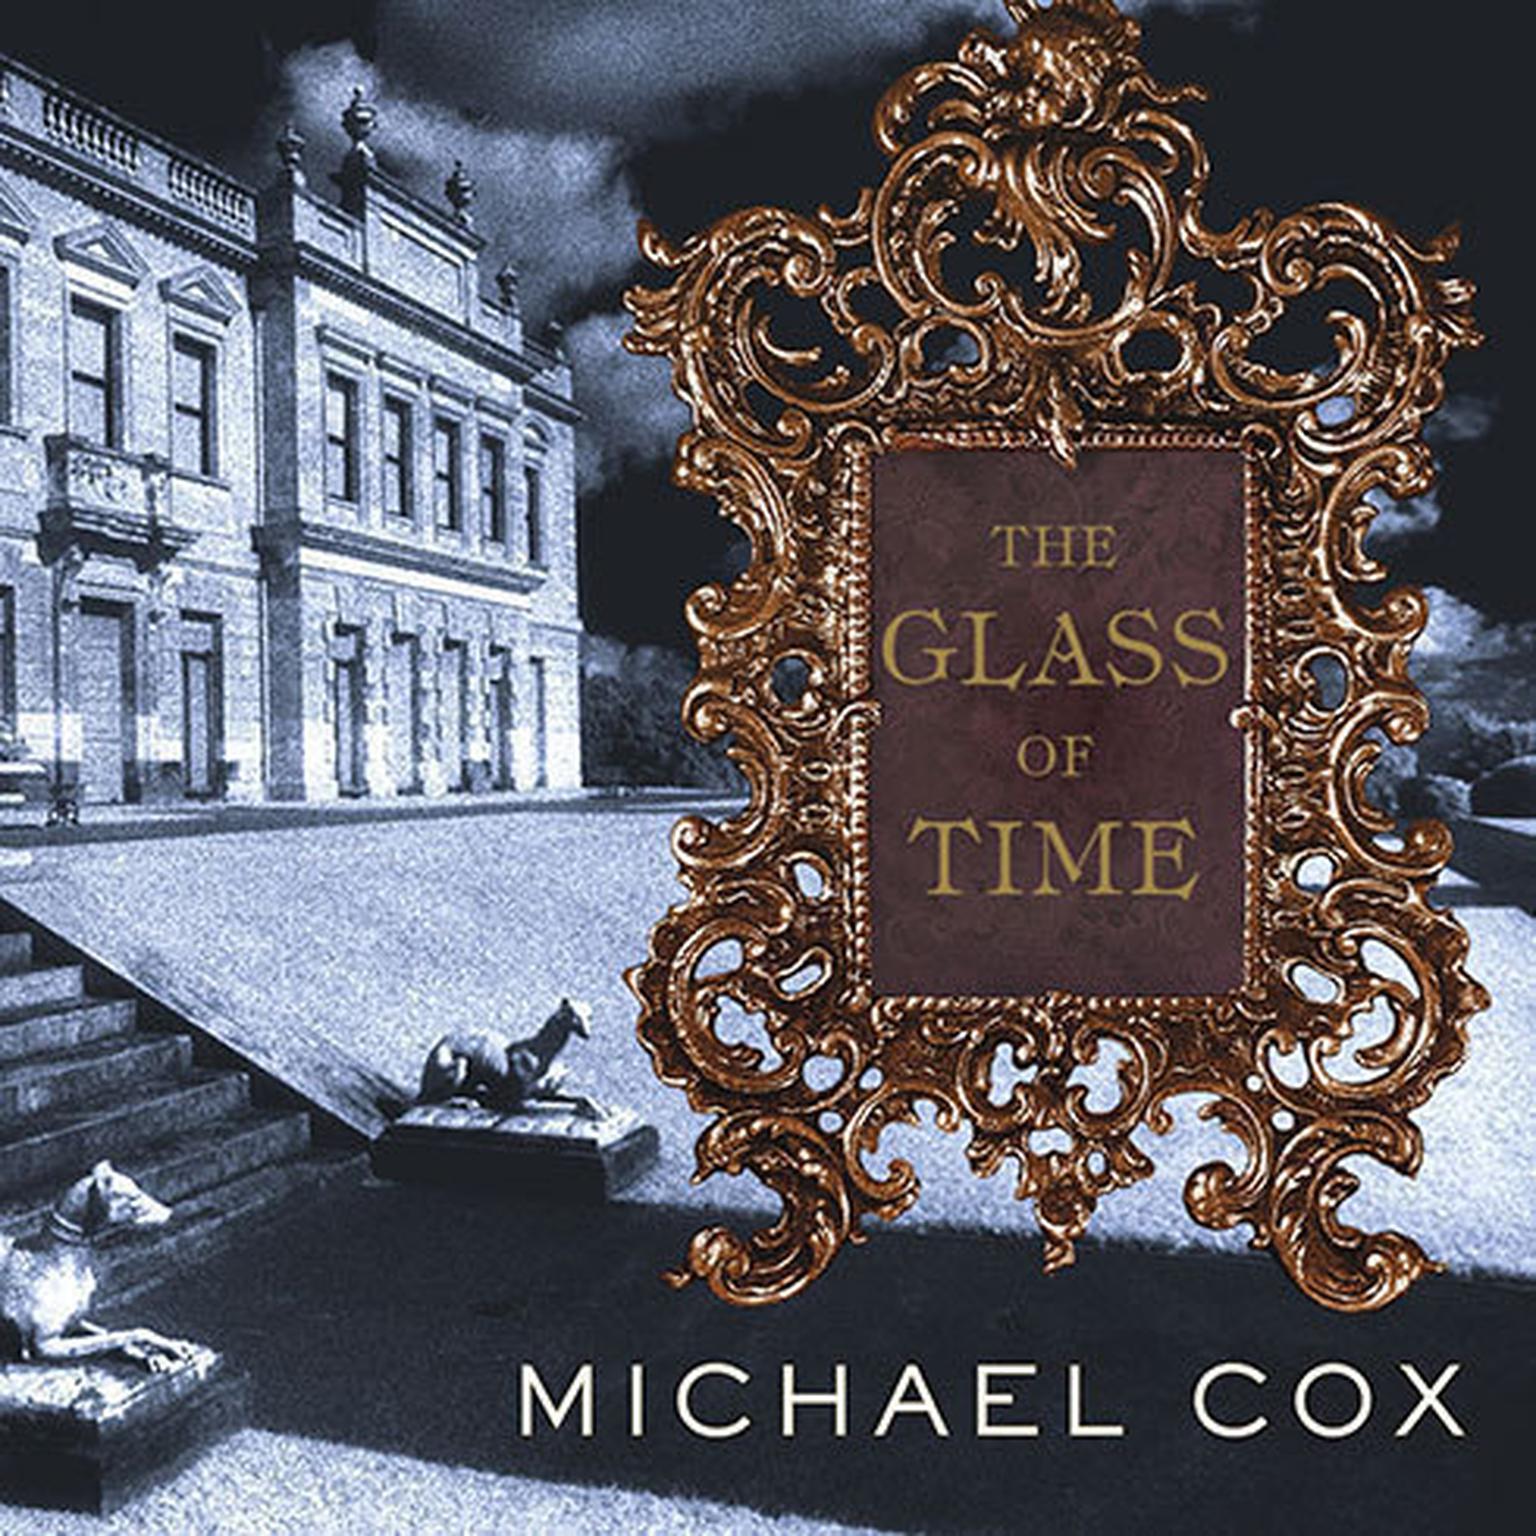 The Glass of Time: A Novel Audiobook, by Michael Cox